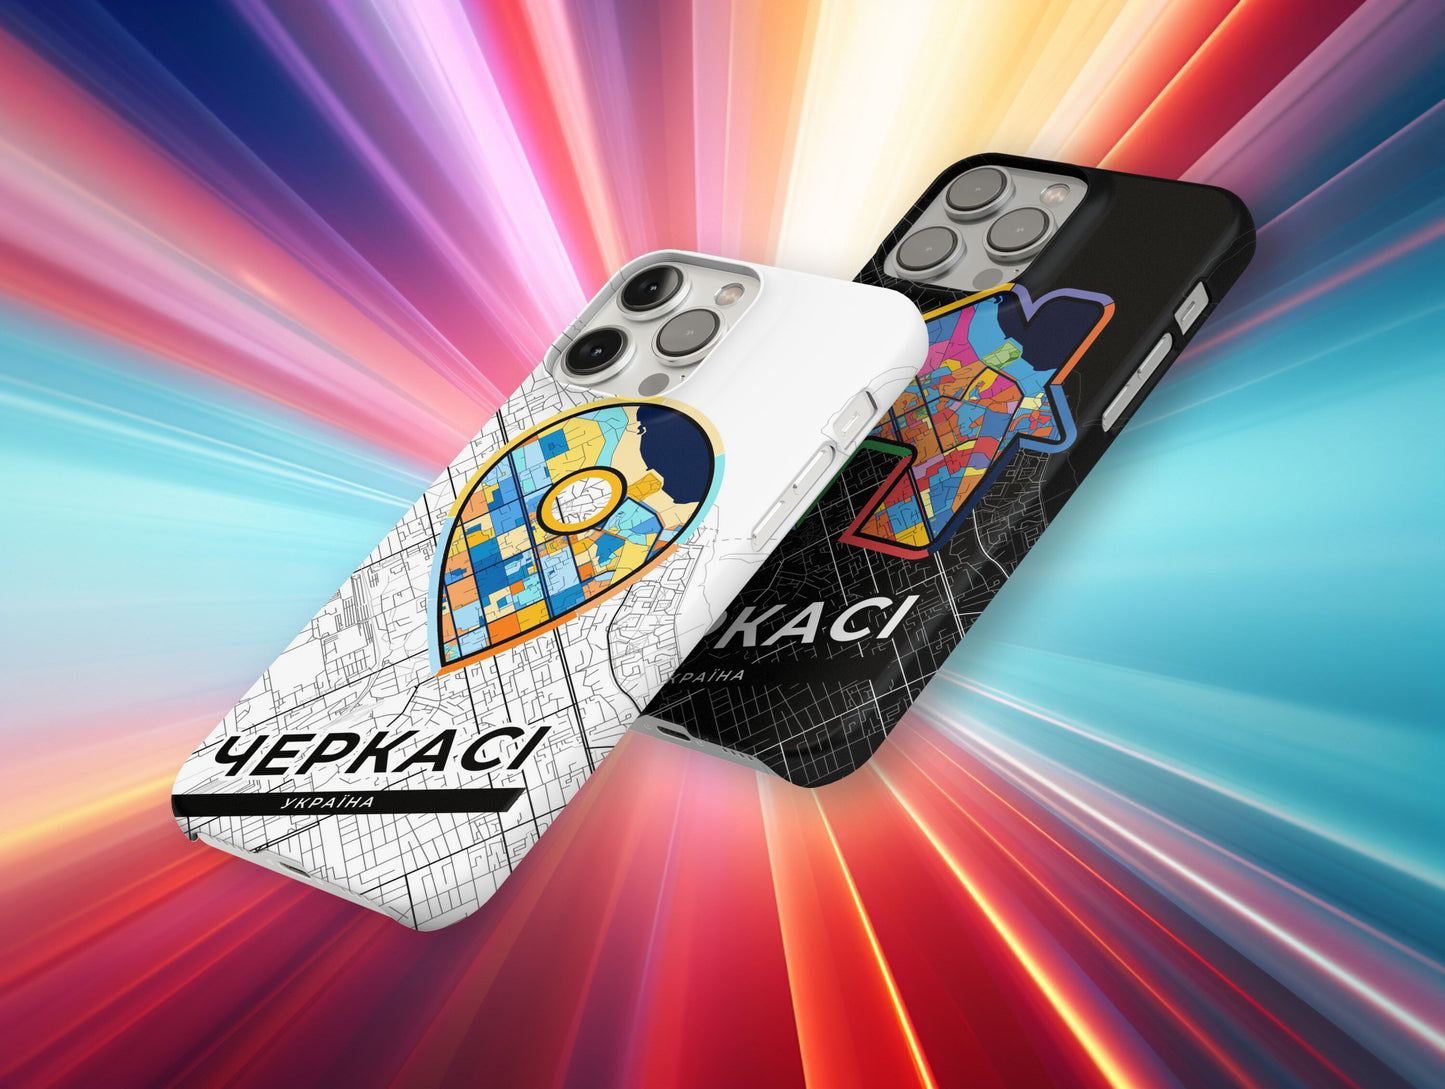 Cherkasy Ukraine slim phone case with colorful icon. Birthday, wedding or housewarming gift. Couple match cases.